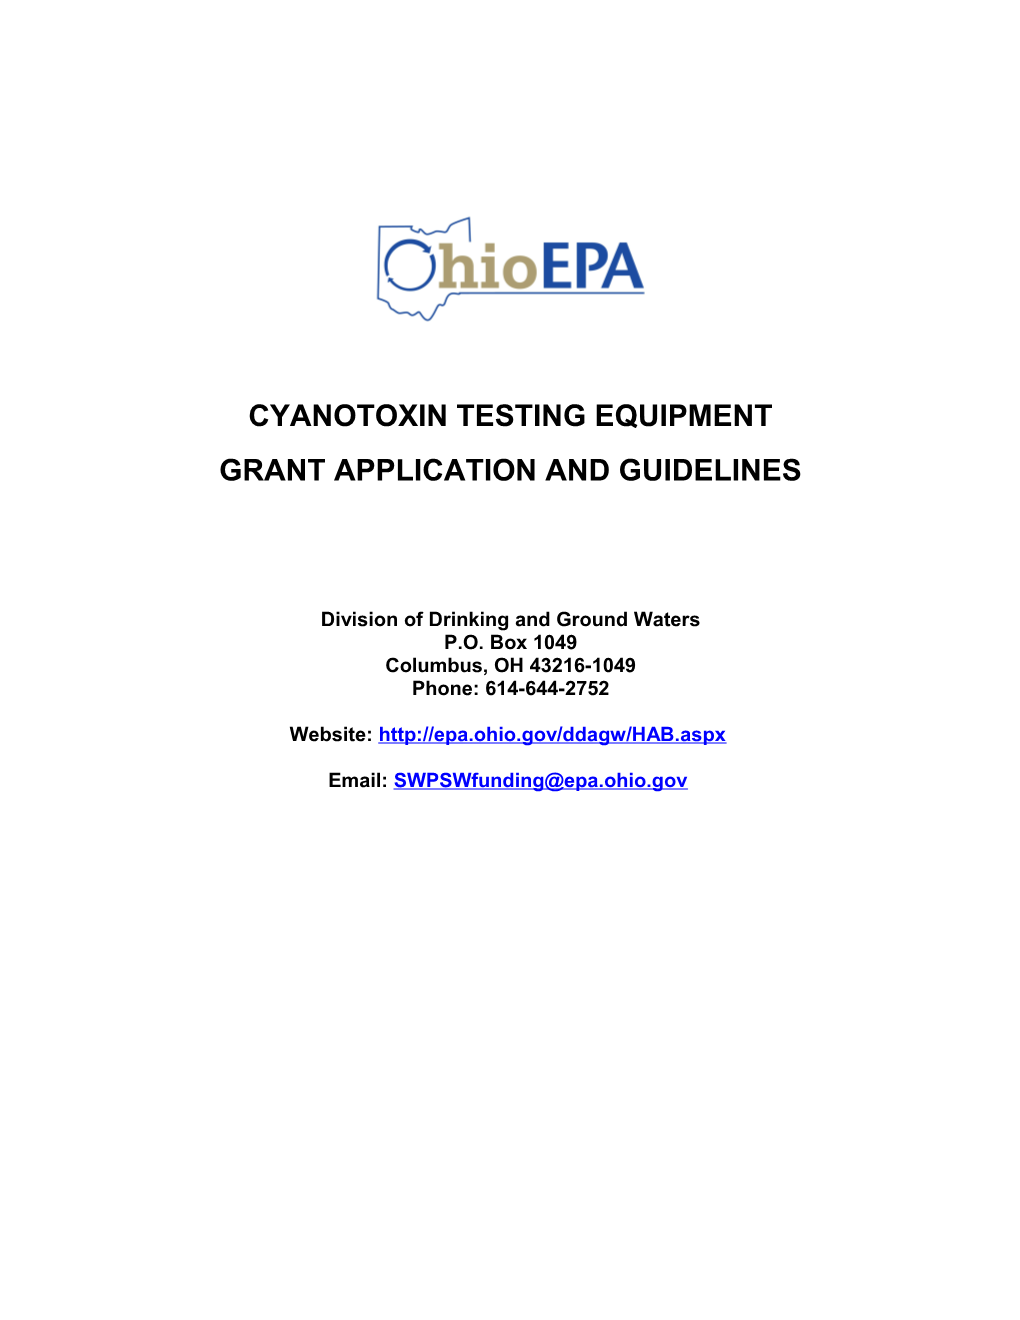 Grant Application and Guidelines